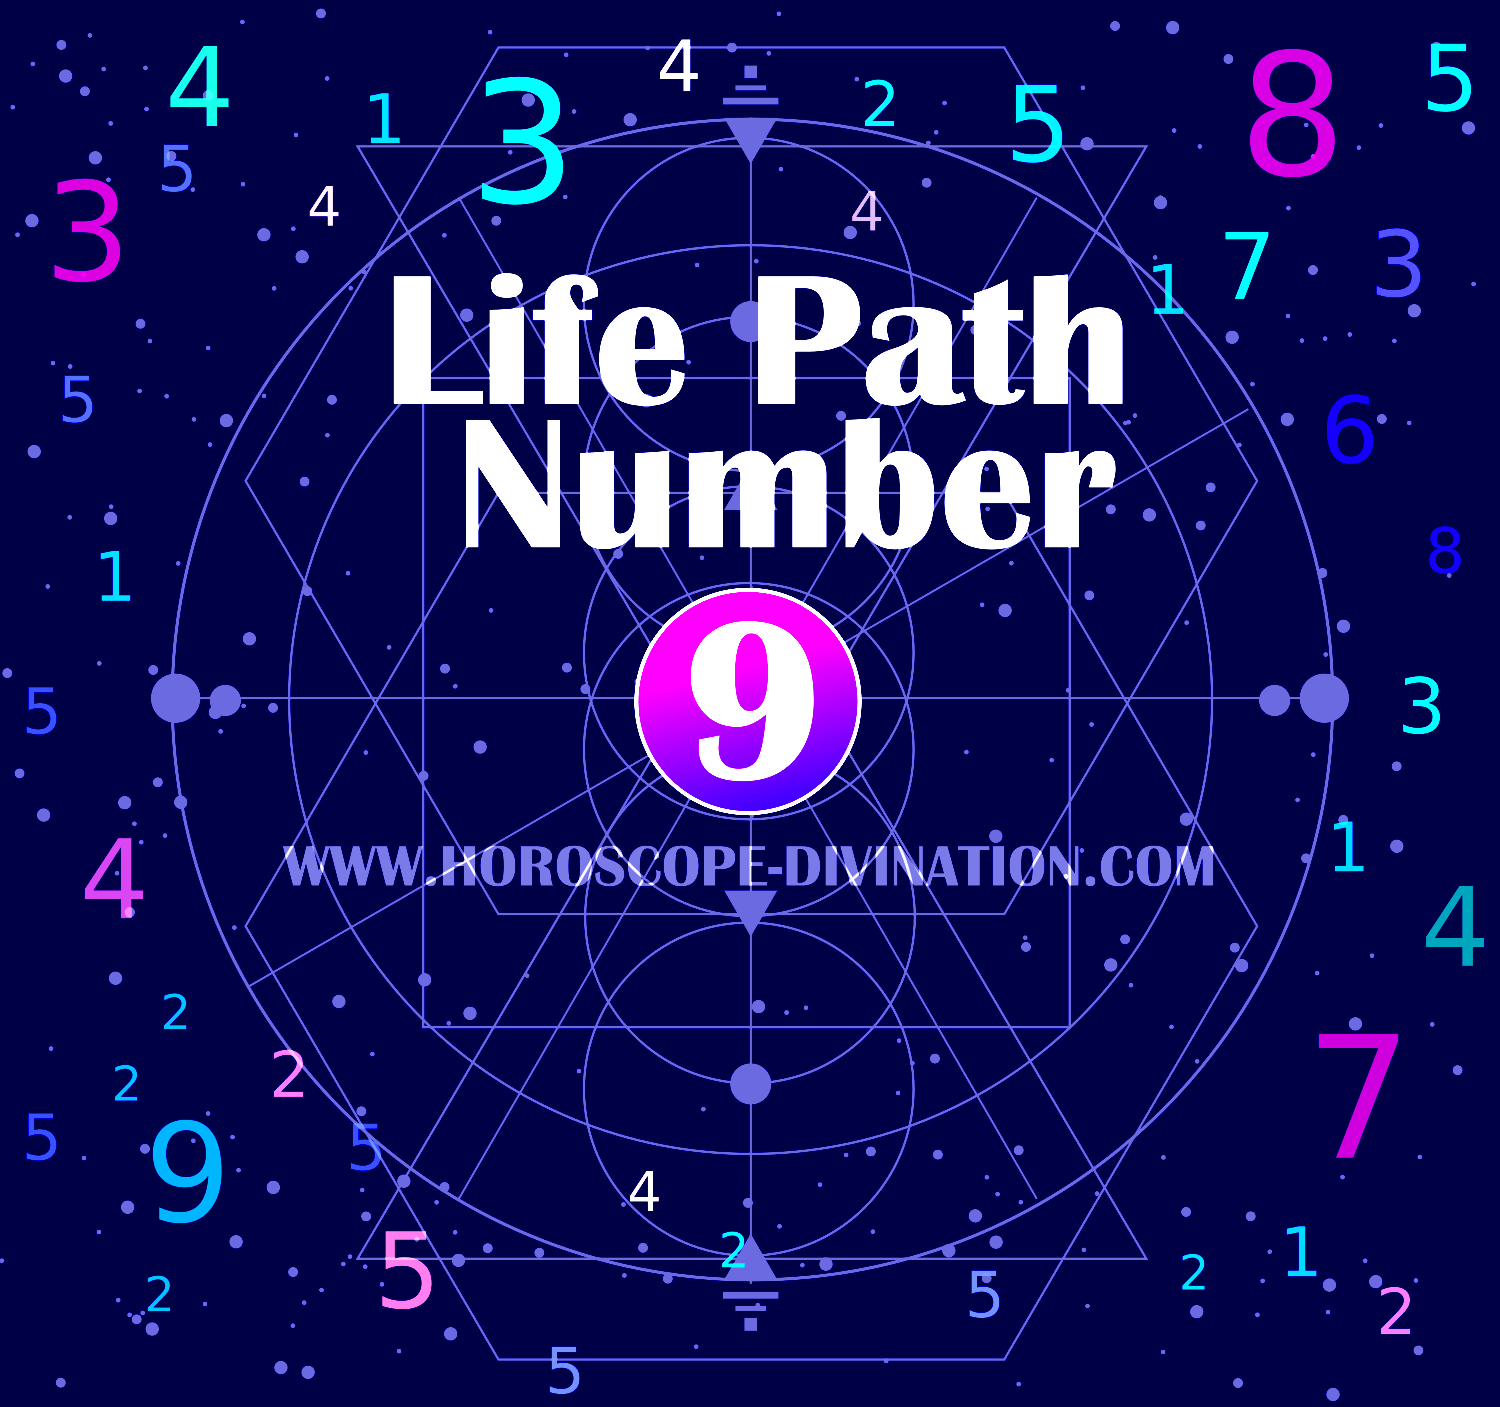 numerology number 3 traits